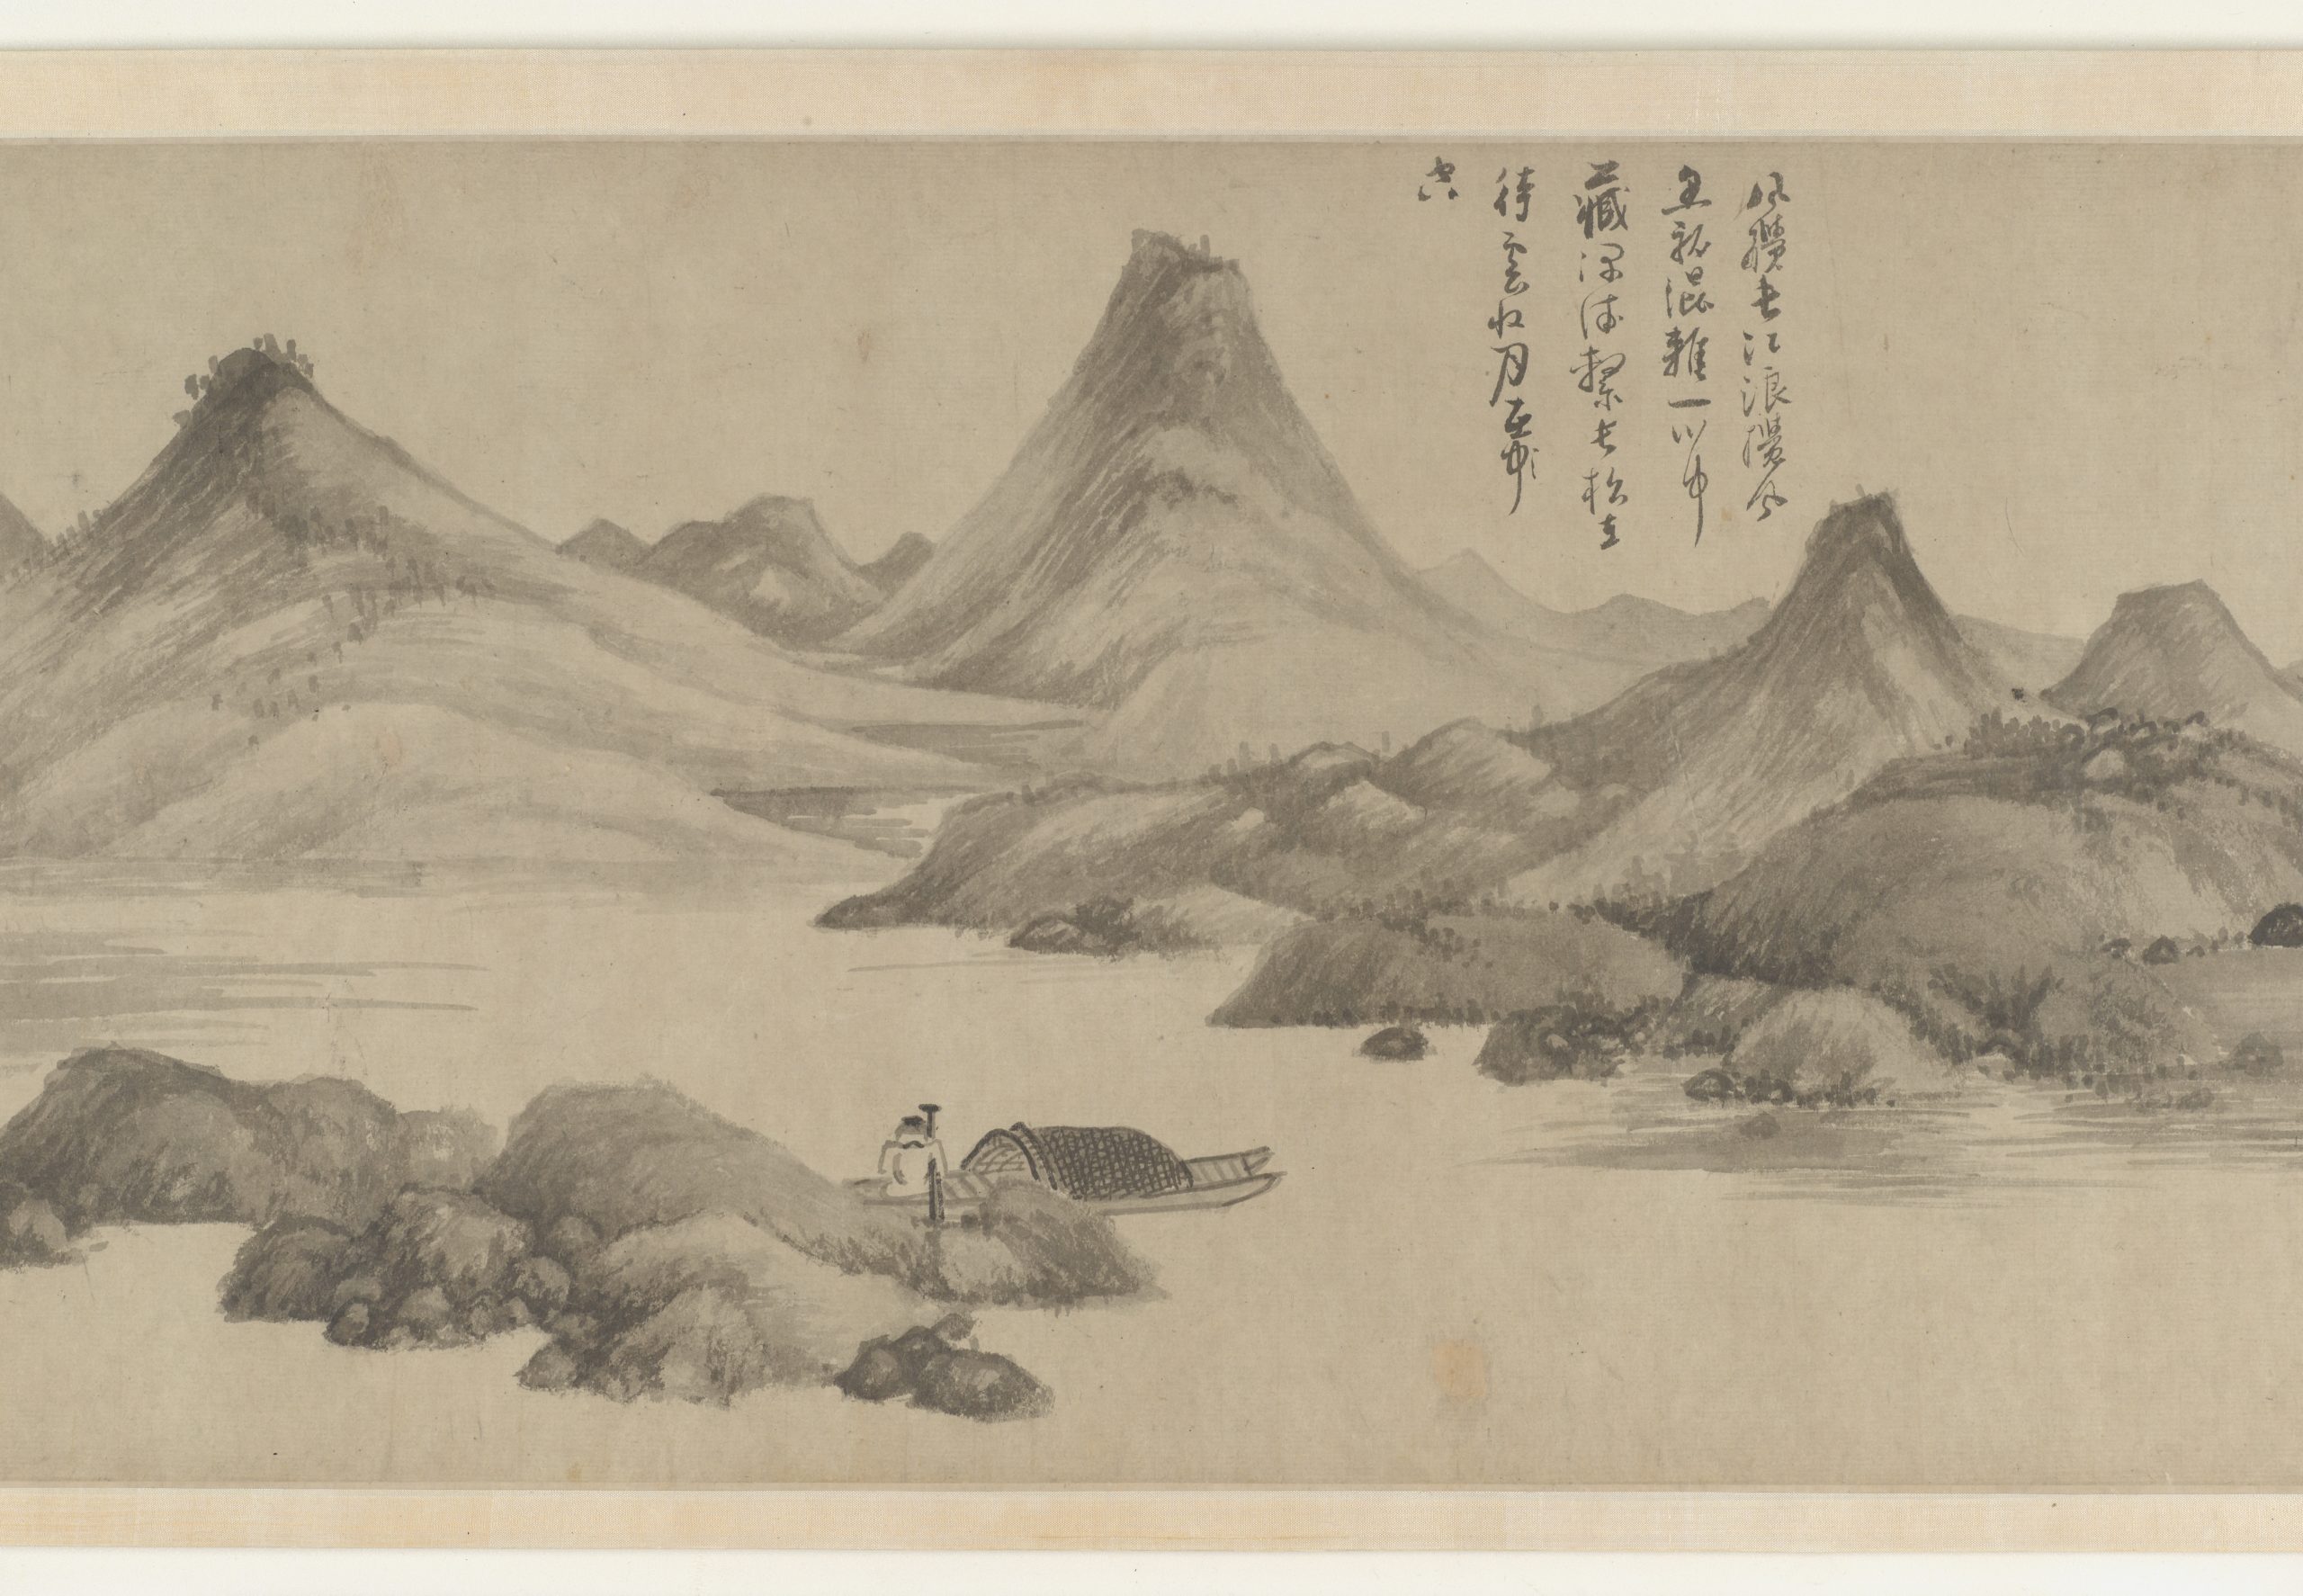 illustration of a man fishing on a lake surrounded by moutains